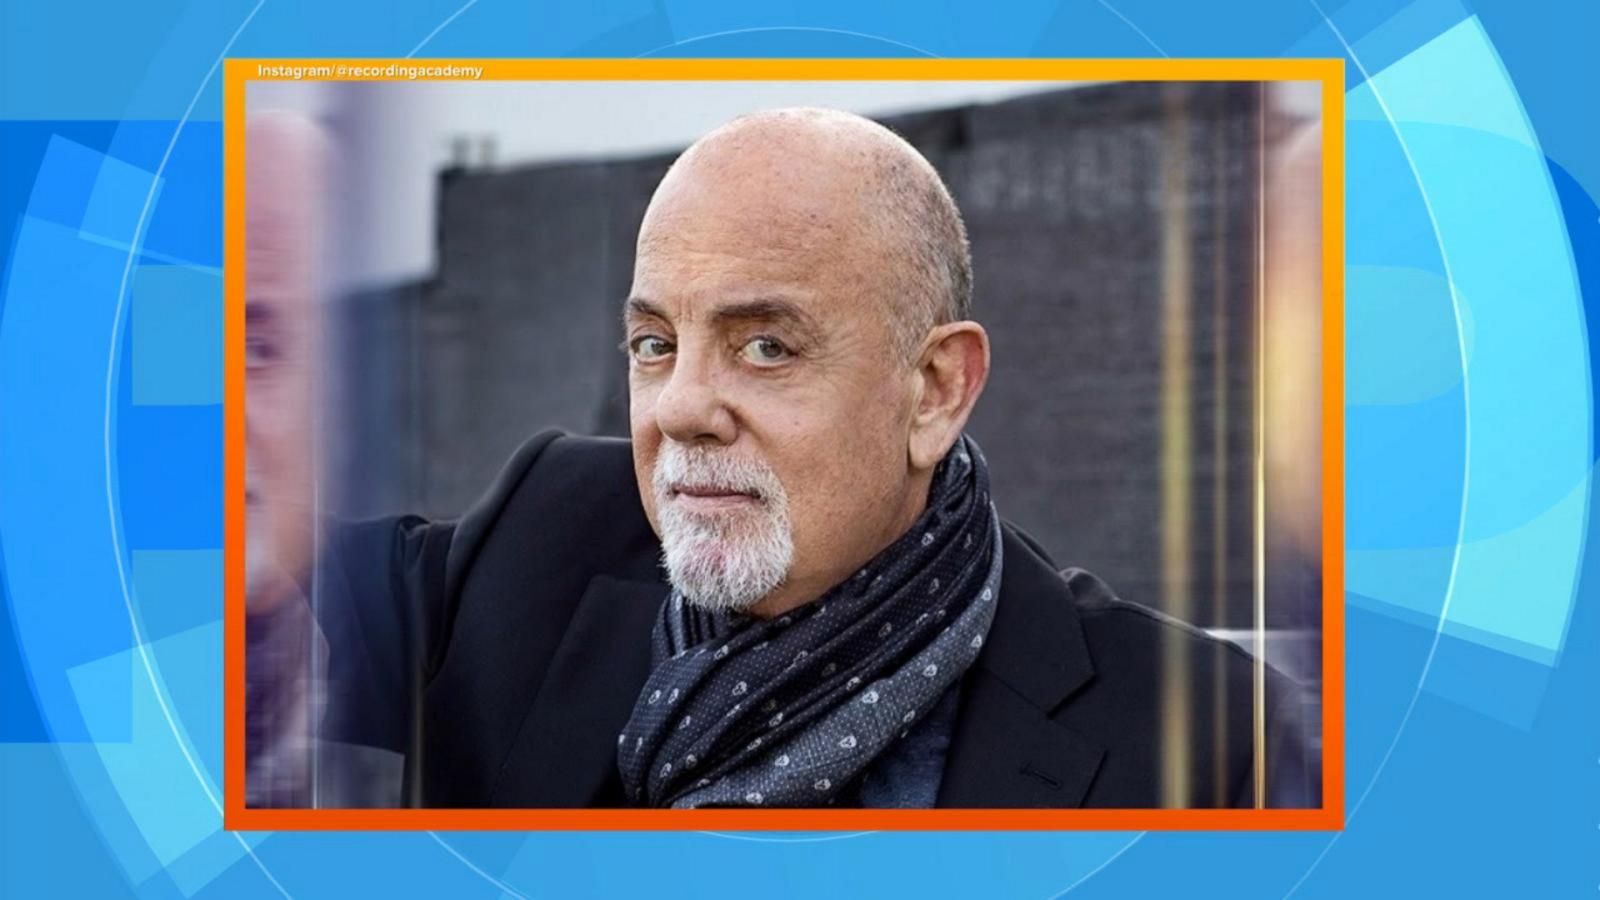 VIDEO: Billy Joel to debut new song at Grammys